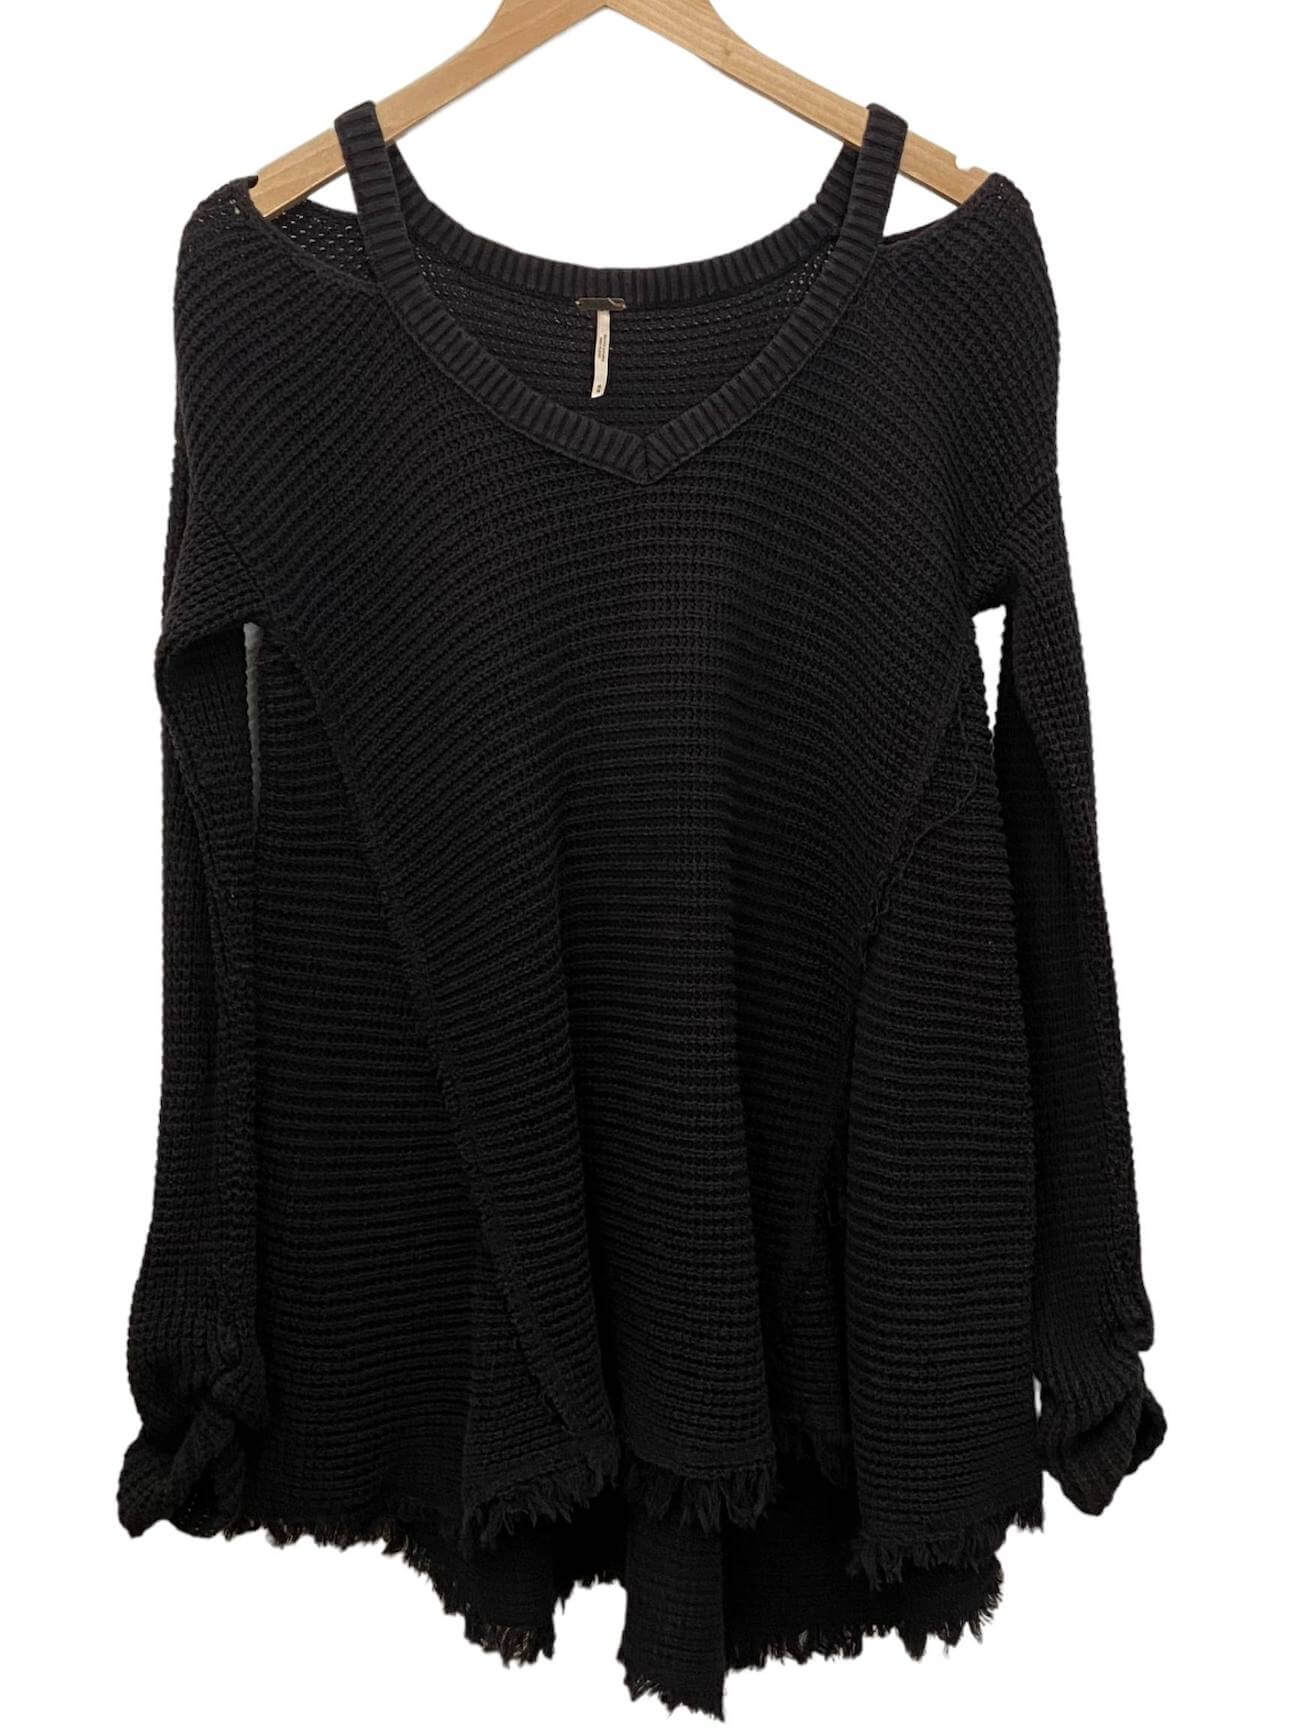 Dark Autumn FREE PEOPLE charcoal gray cold shoulder waffle knit sweater